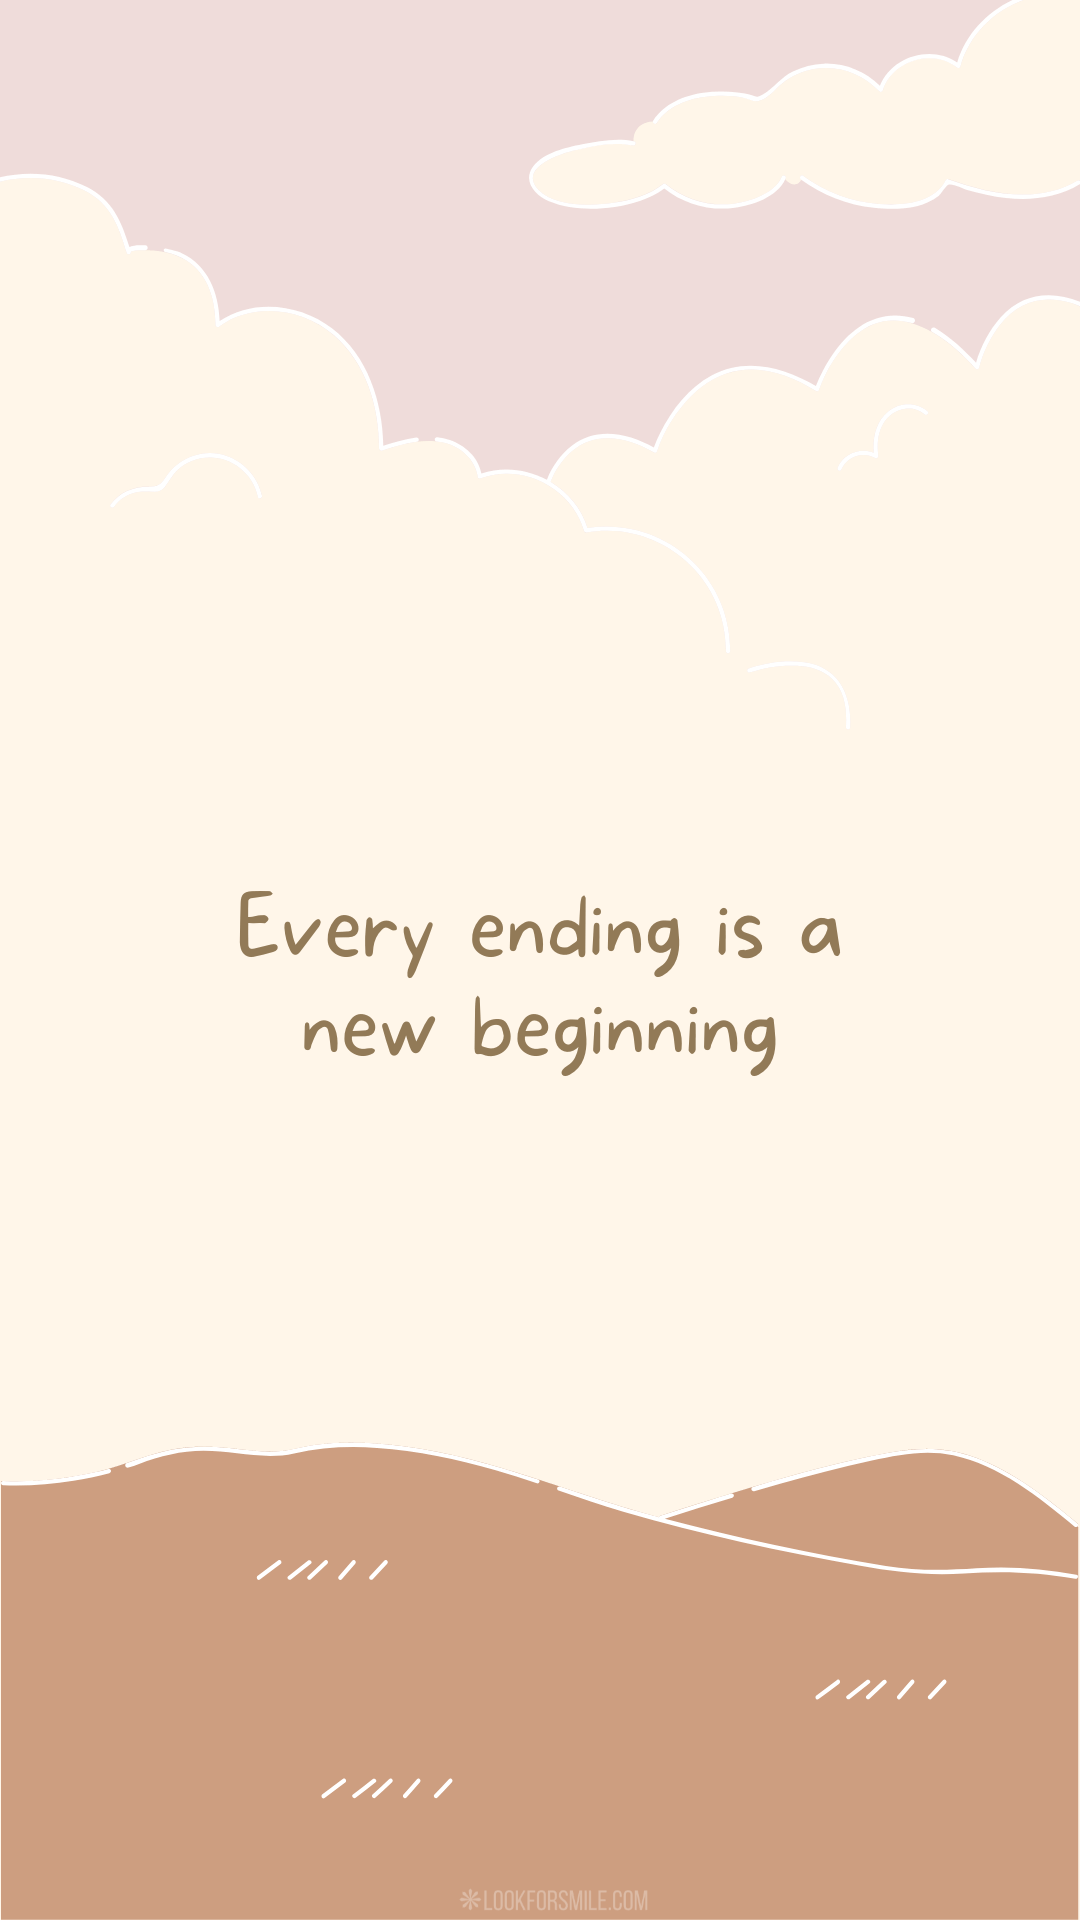 Every ending is a new beginning quote on graphic design clouds, light pink sky and light brown ground – mobile wallpaper - Lookforsmile.com